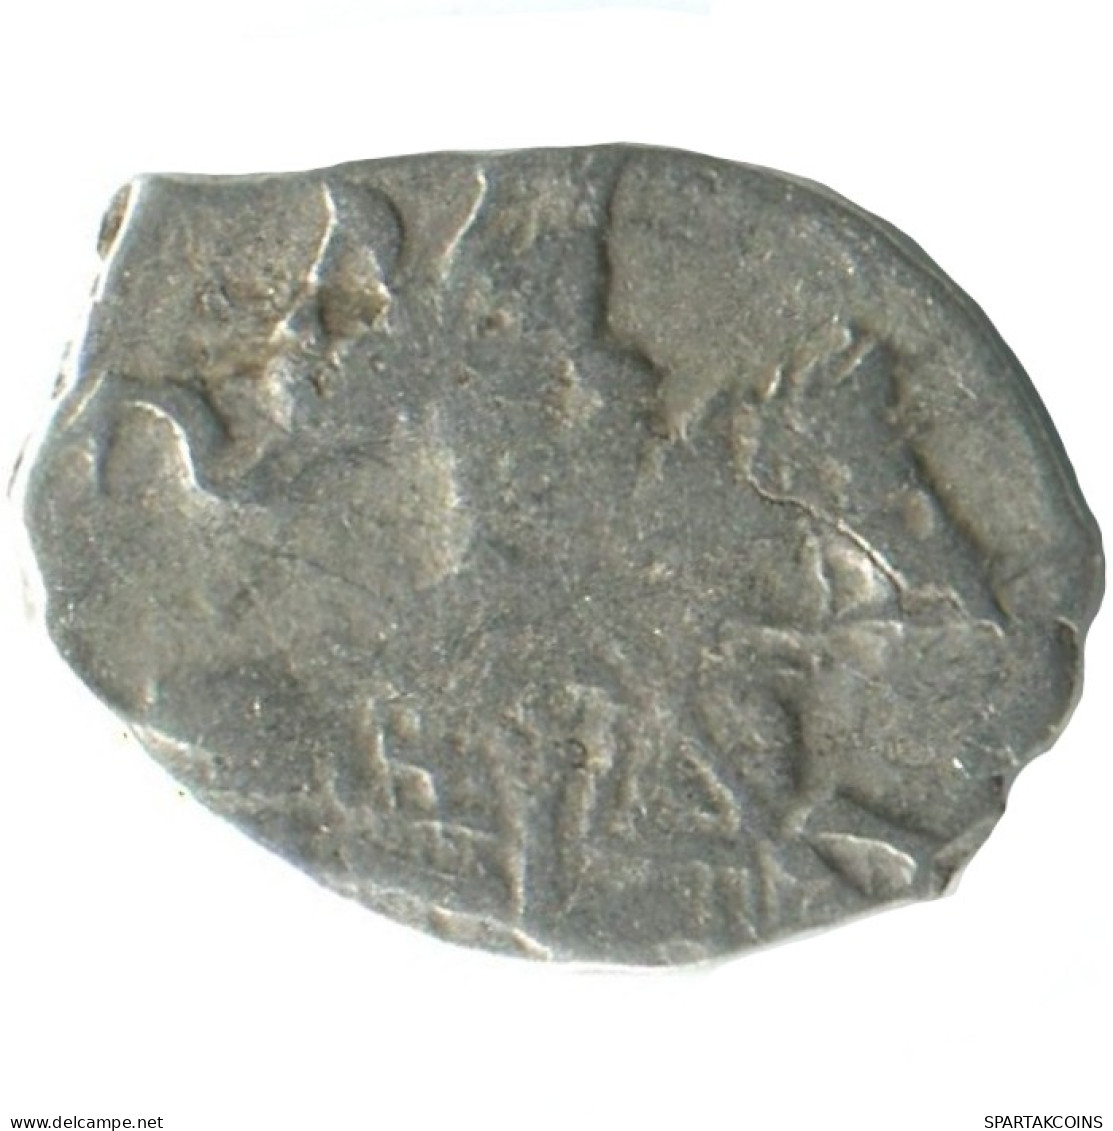 RUSSIE RUSSIA 1702 KOPECK PETER I KADASHEVSKY Mint MOSCOW ARGENT 0.3g/11mm #AB539.10.F.A - Rusia